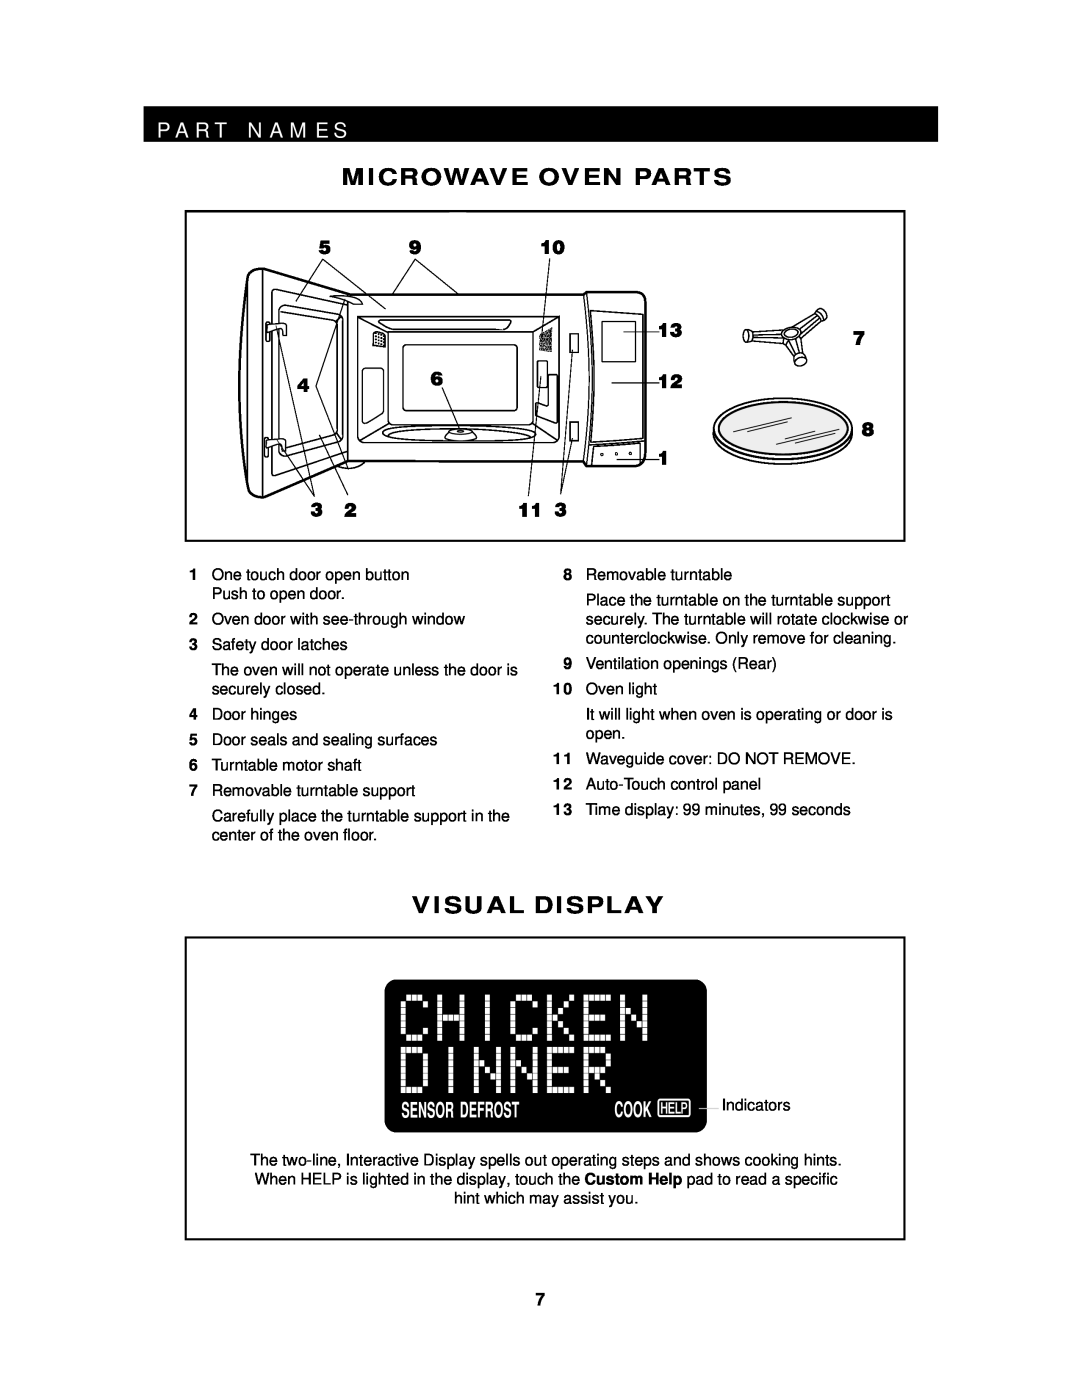 Sharp R-430D, R-530D operation manual P A R T N A M E S, Microwave Oven Parts, Visual Display 